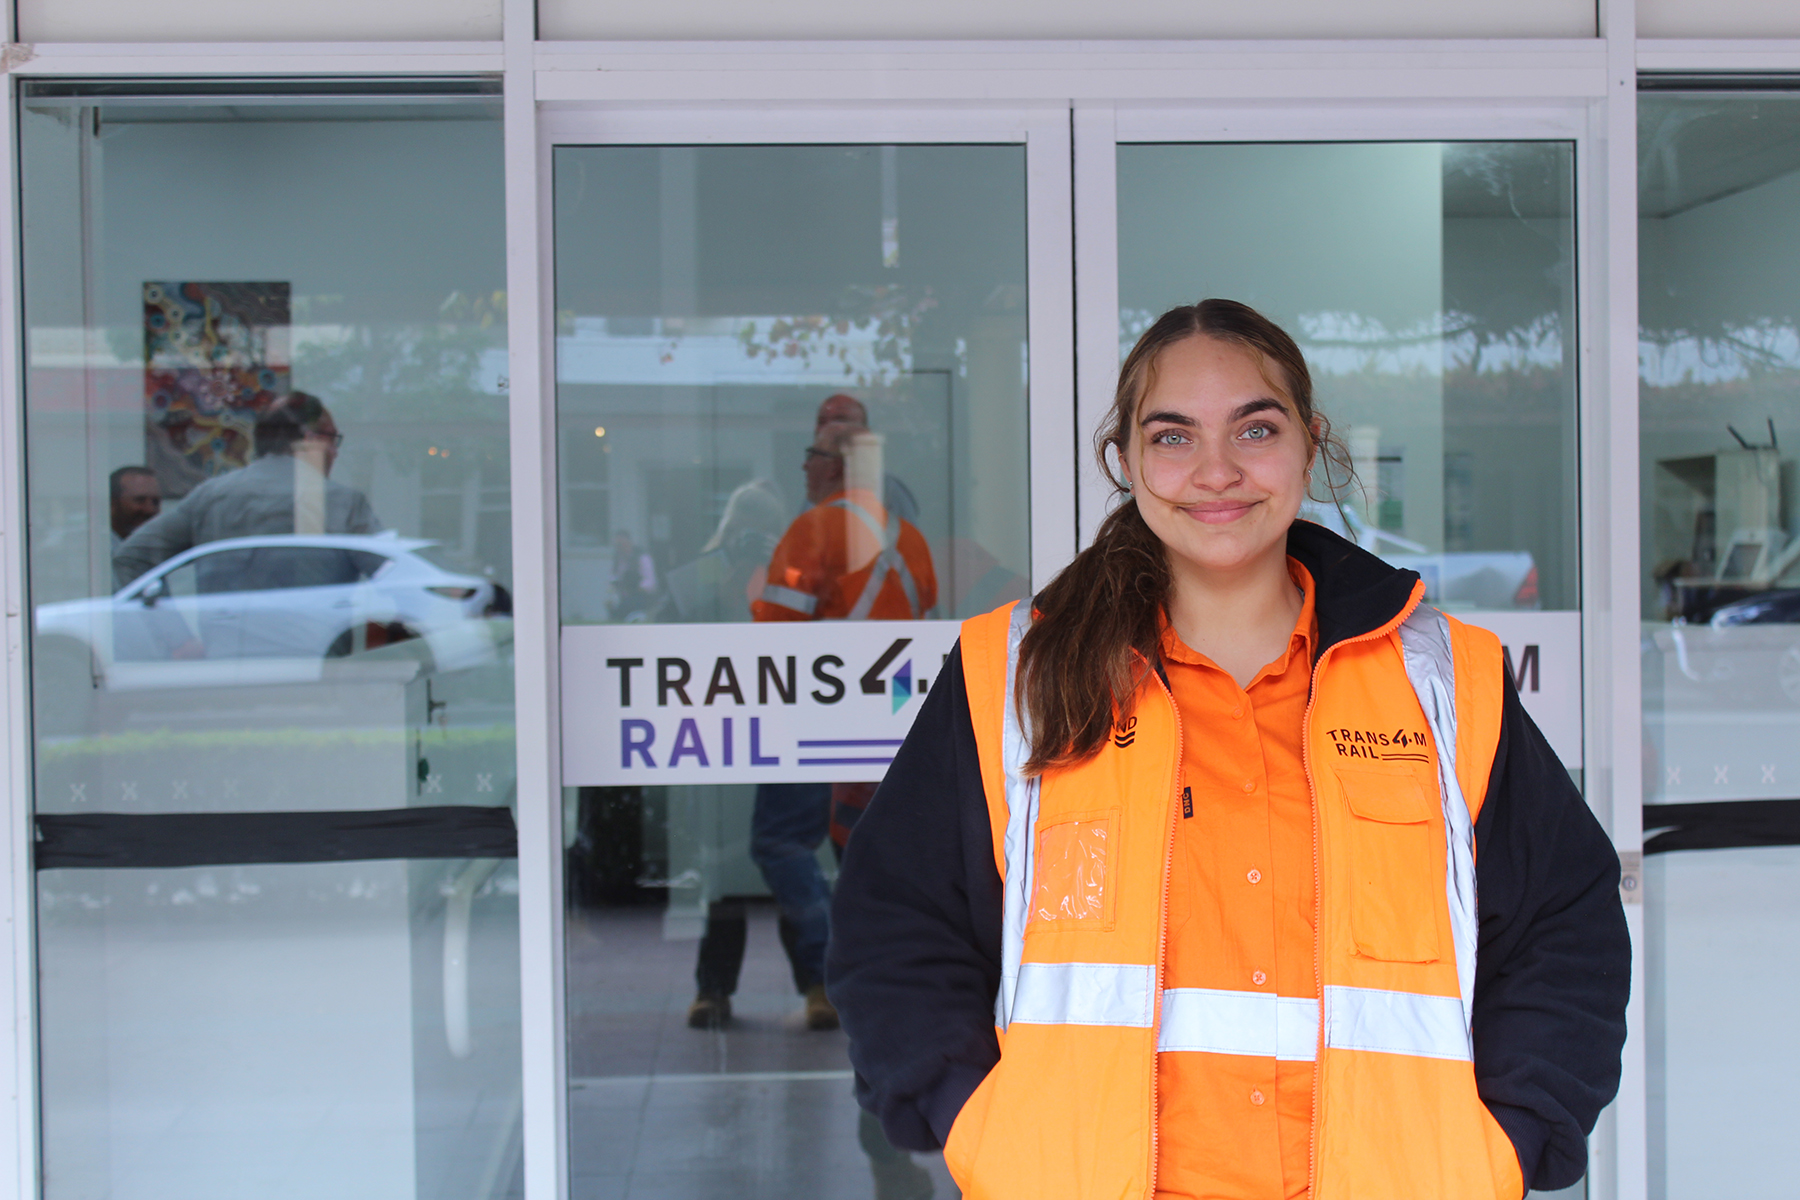 Miaya is a Project Management Trainee and is a Moree local